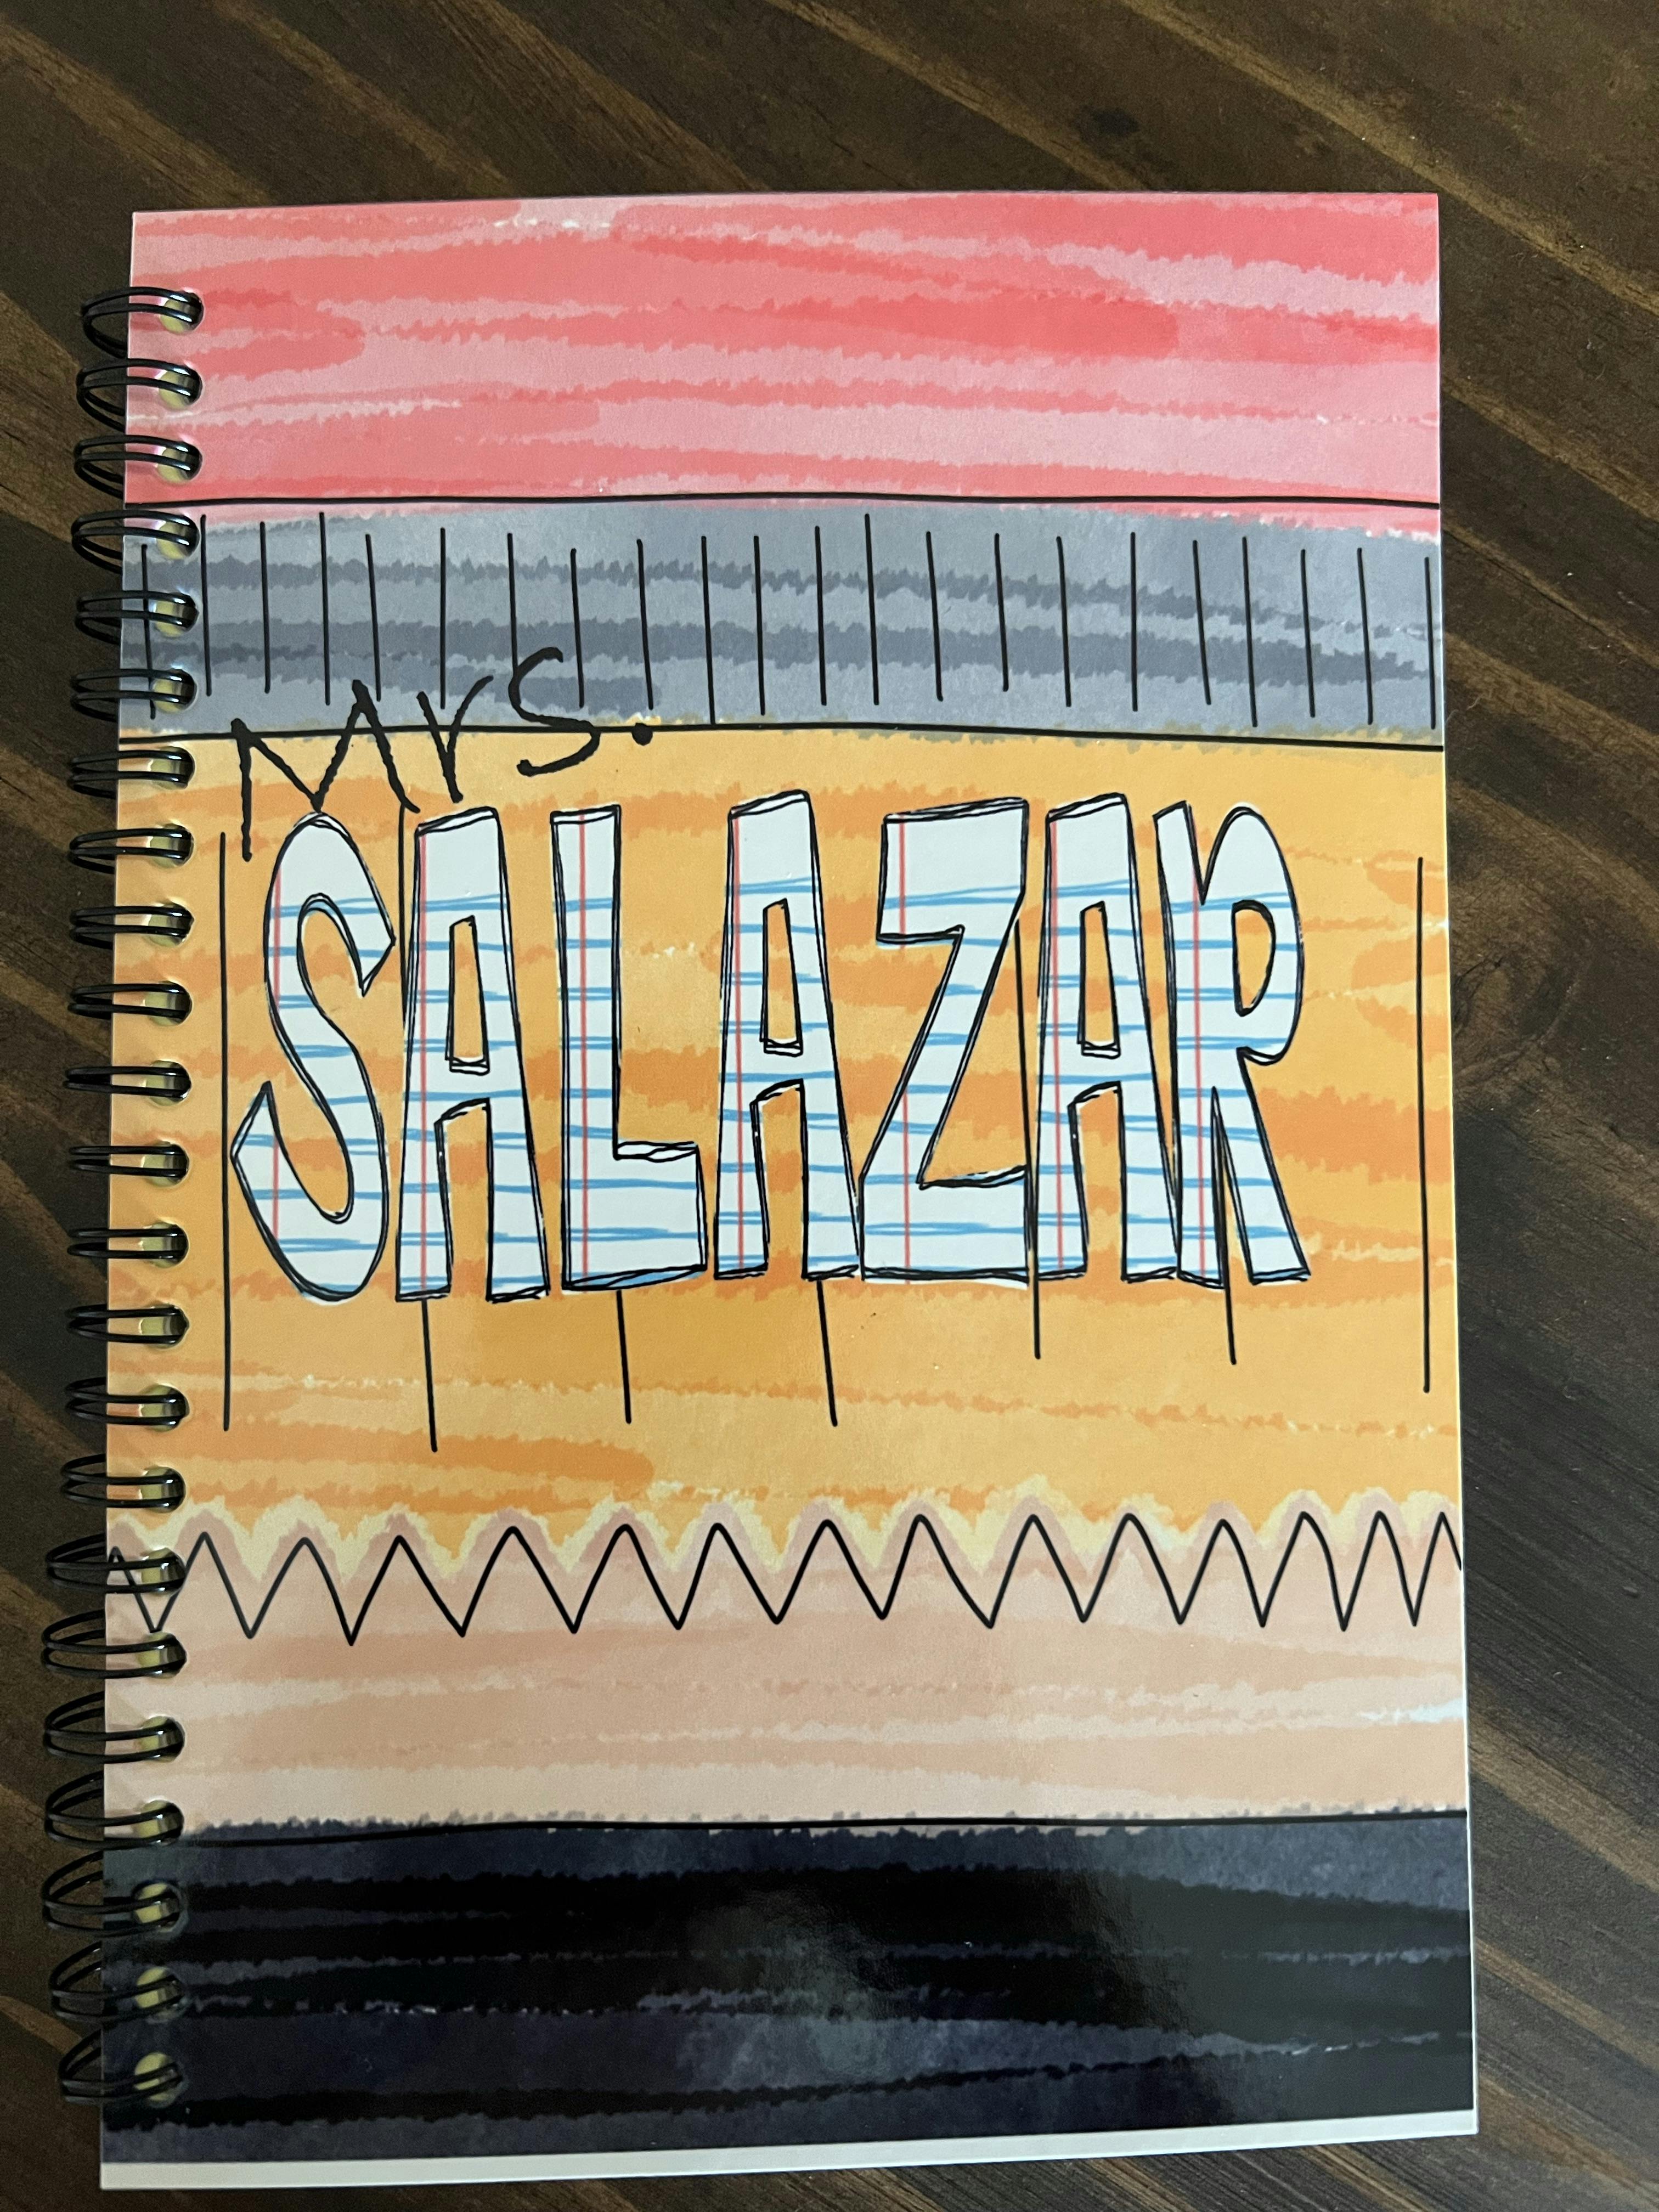 Personalized notebook